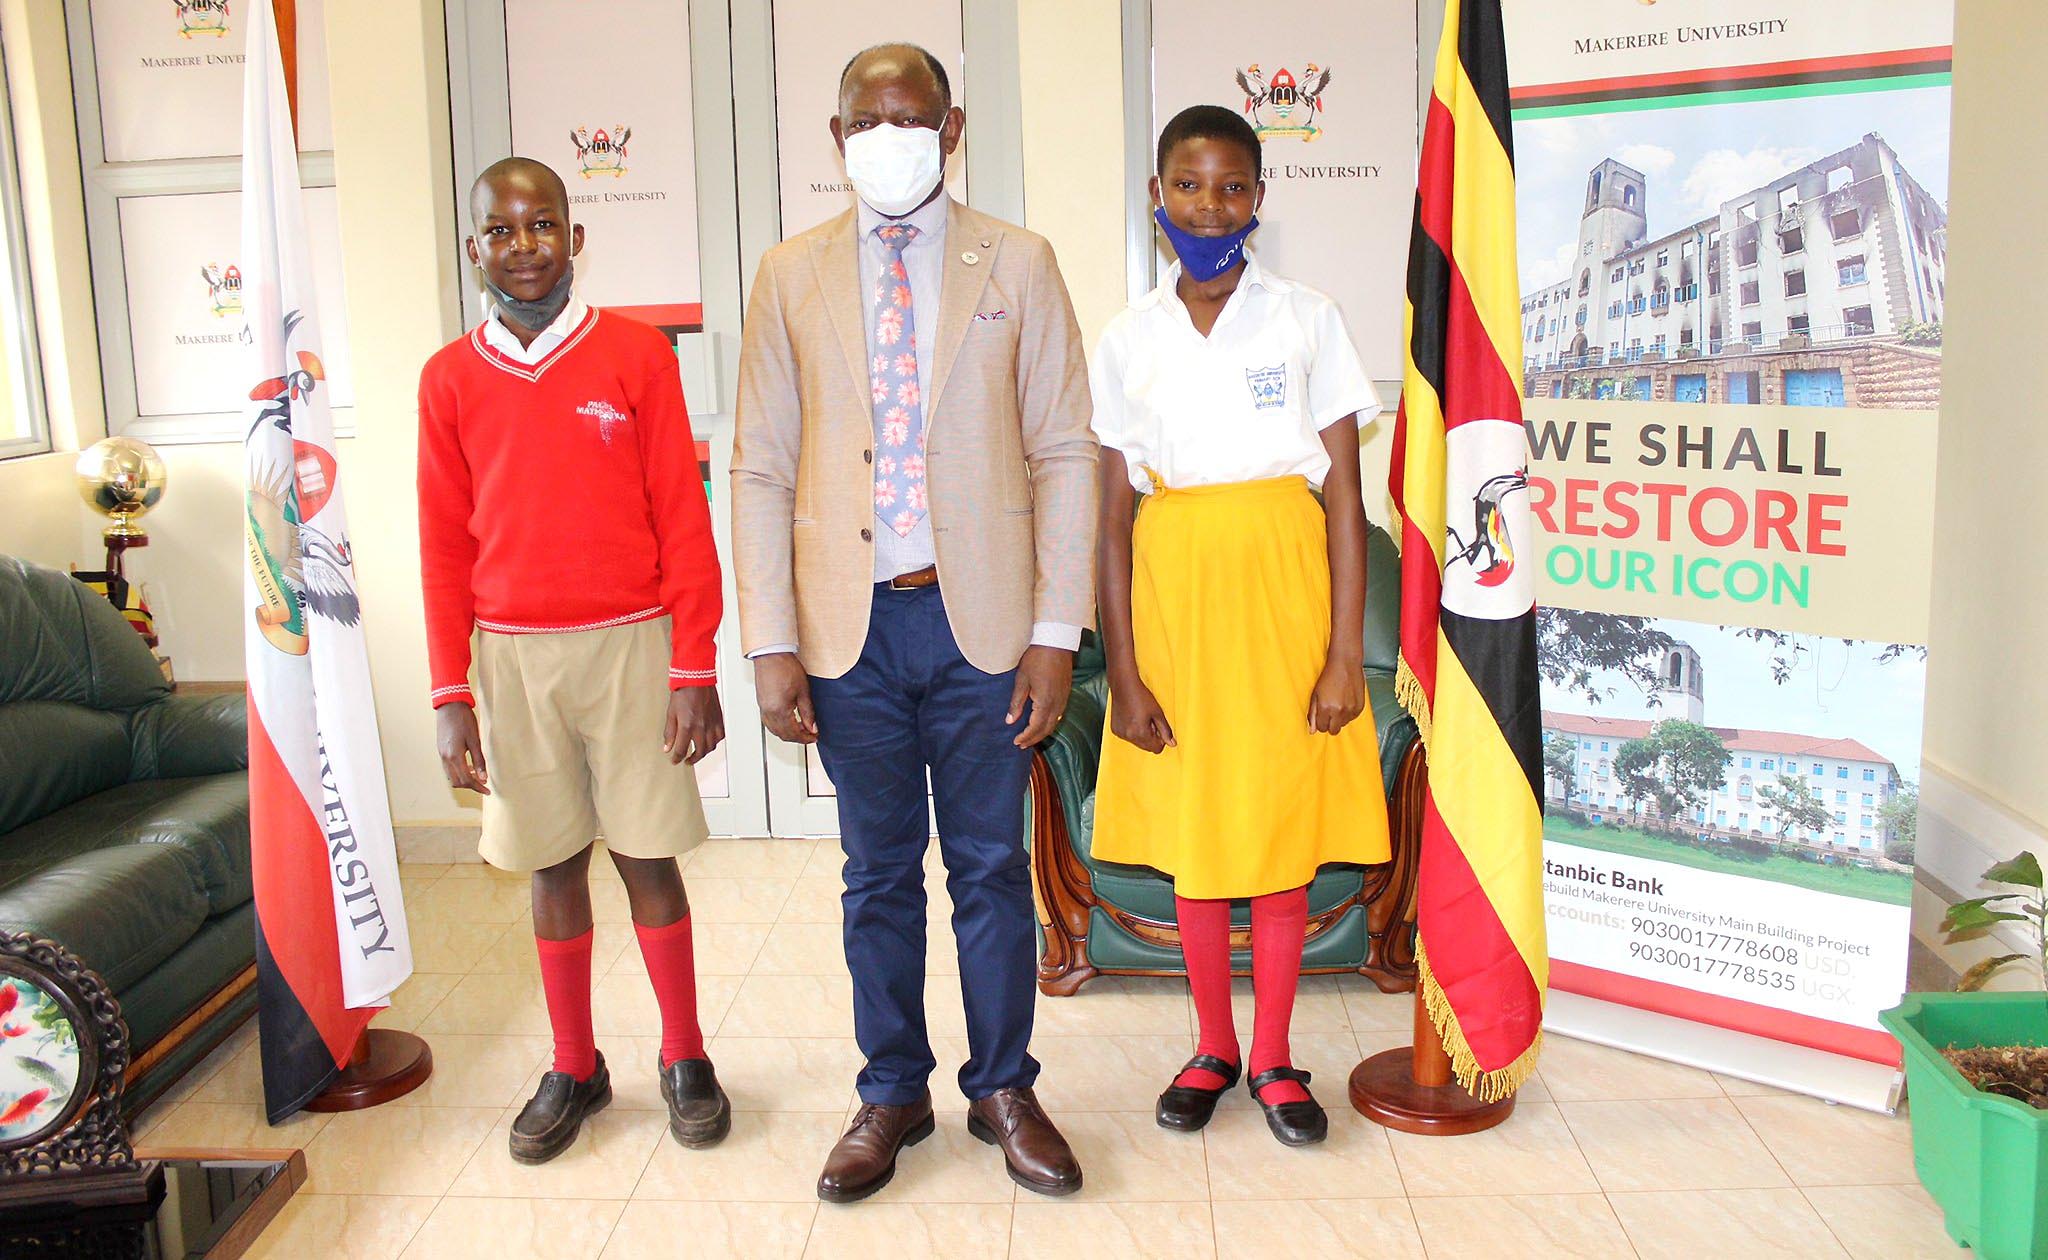 The Vice Chancellor, Prof. Barnabas Nawangwe (C) poses with P.7 pupils of Makerere University Primary School Joan Ayikoru (R) and Daniel Twesigye (L) during the visit on 18th December 2020 at the Central Teaching Facility 1 (CTF1).